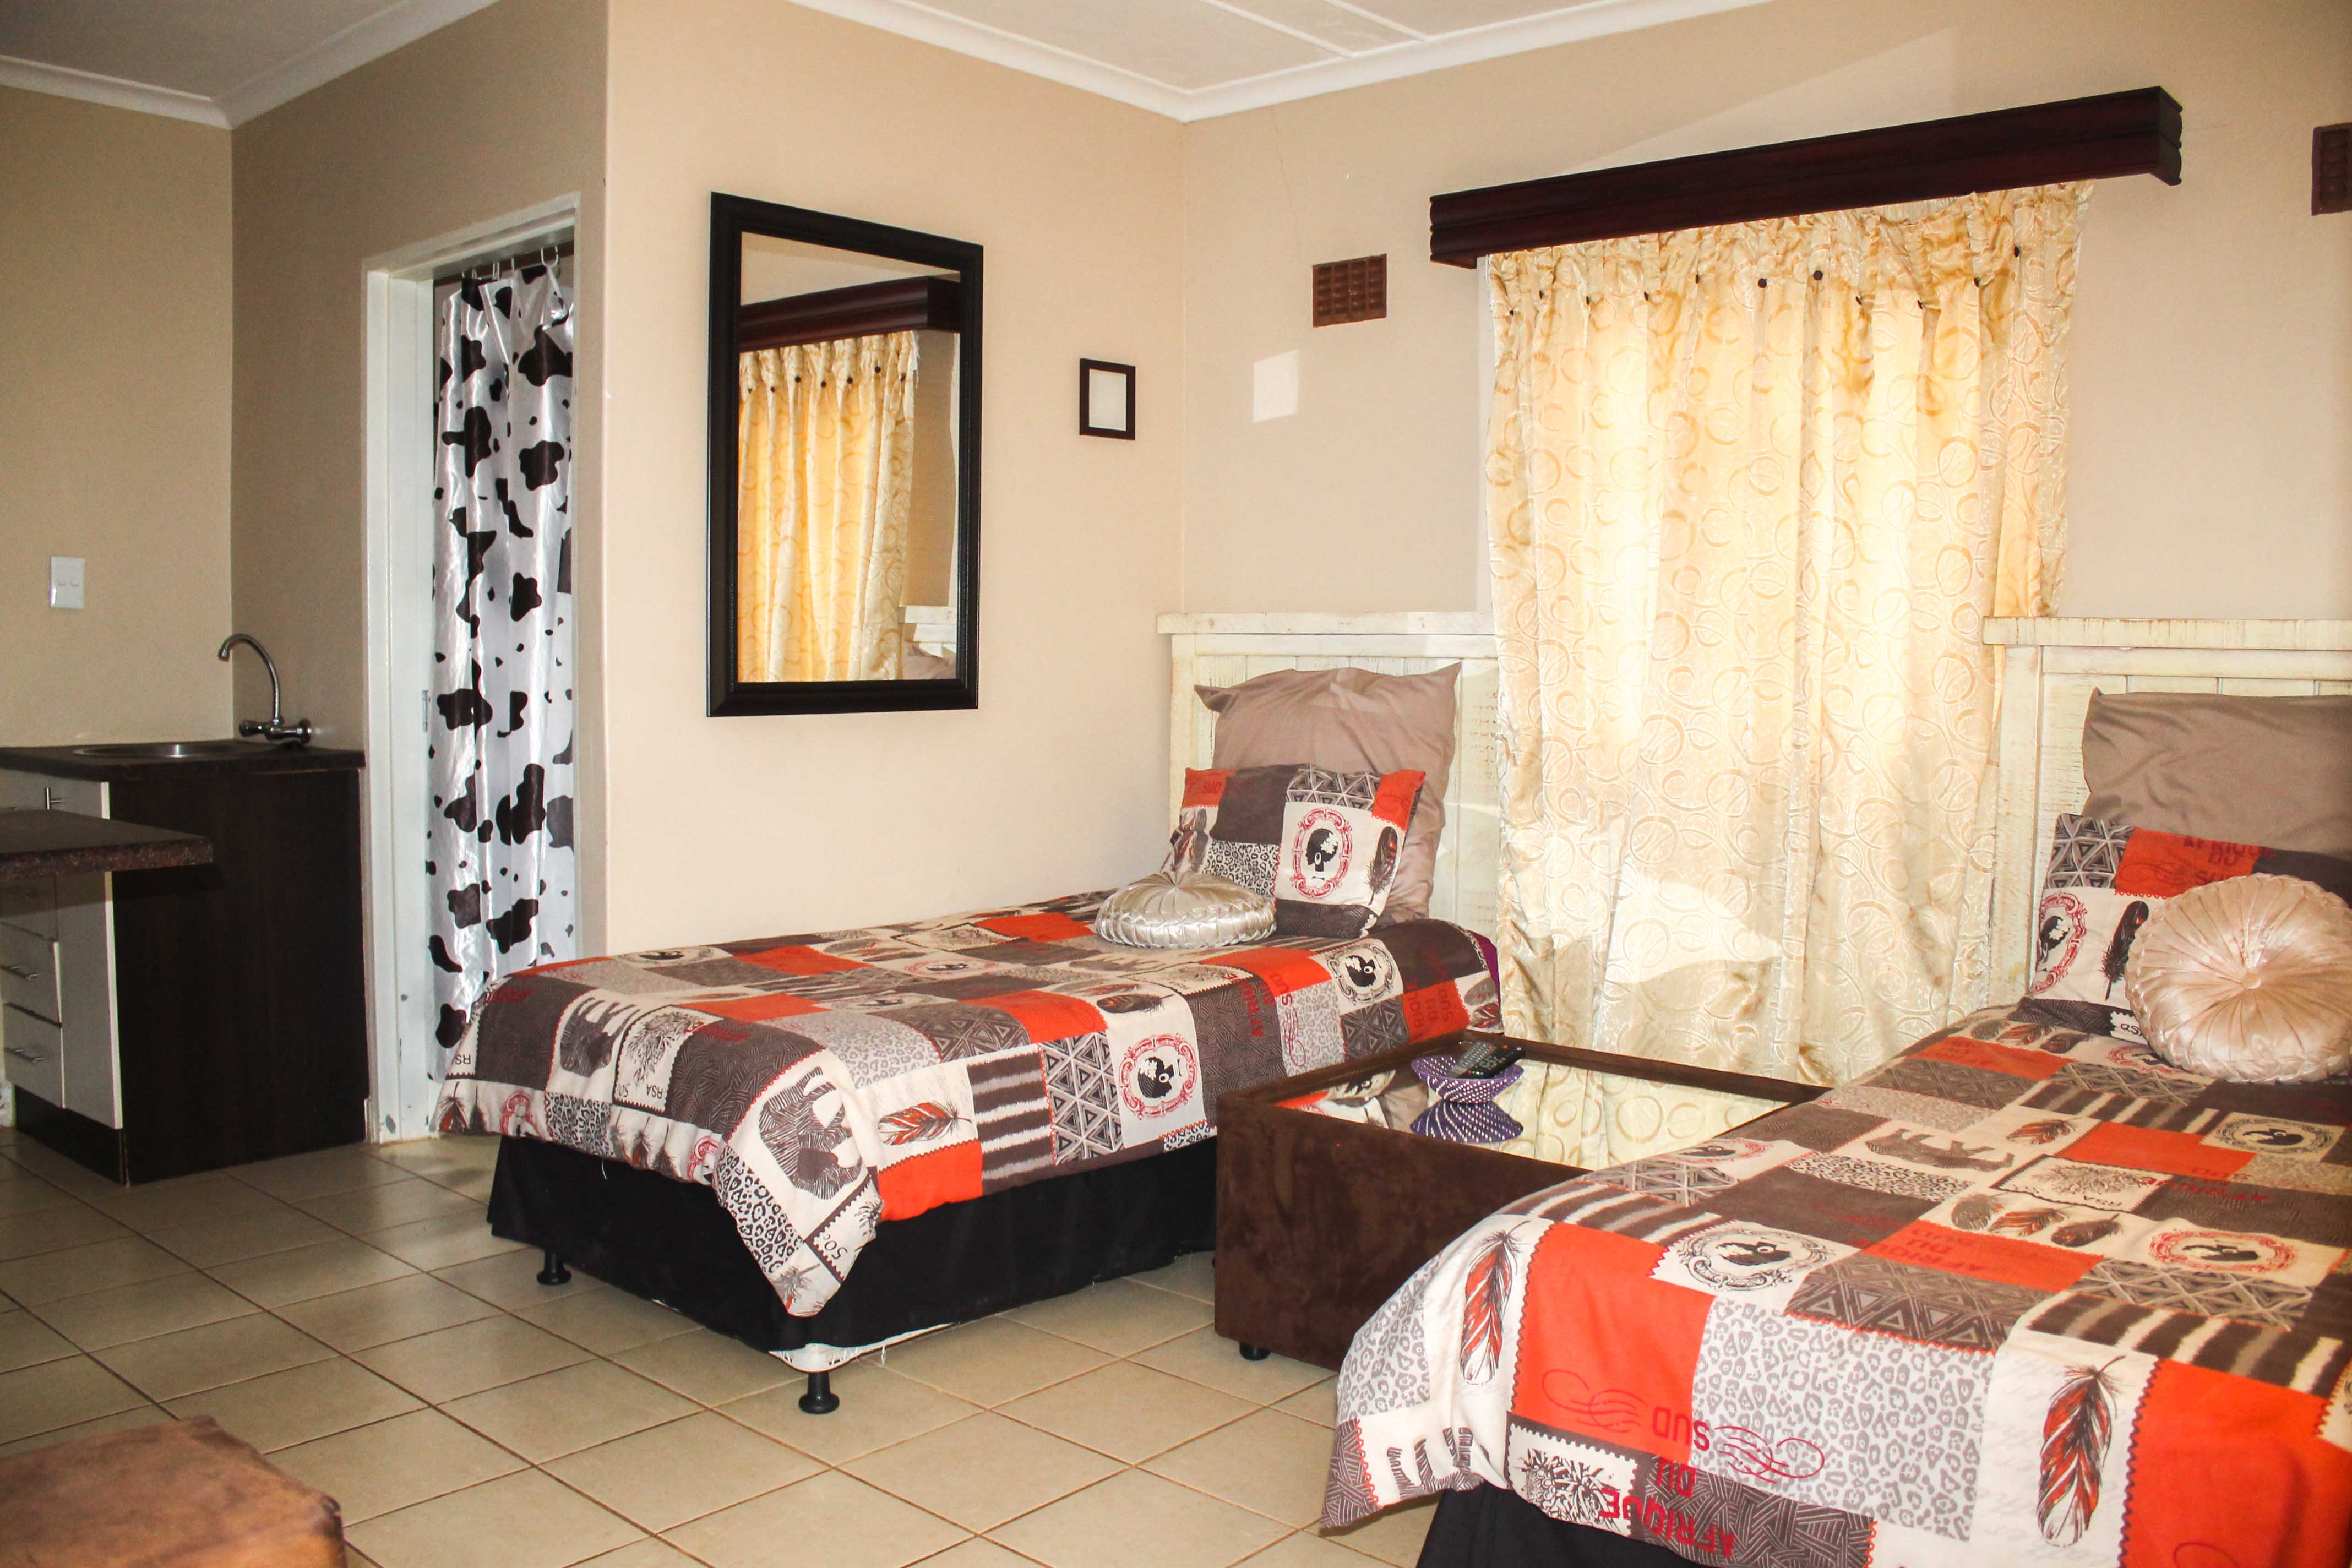 2 Additional Single Beds